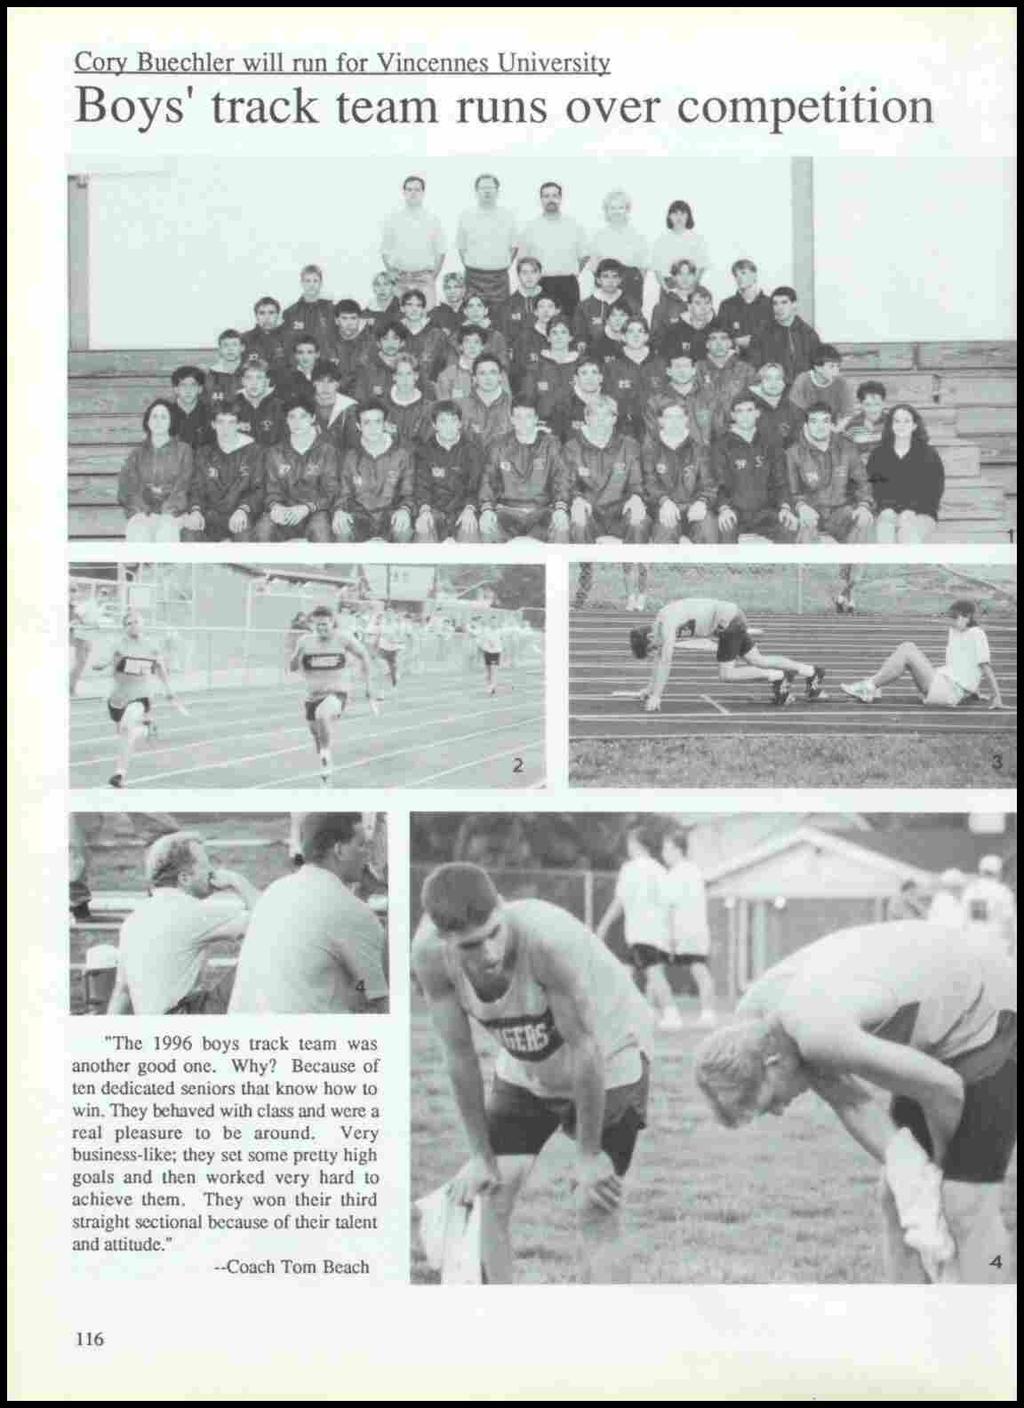 Cory Buechler will run for Vincennes University Boys' track team runs over competition "The 1996 boys track team was another good one. Why? Because of ten dedicated seniors that know how to win.